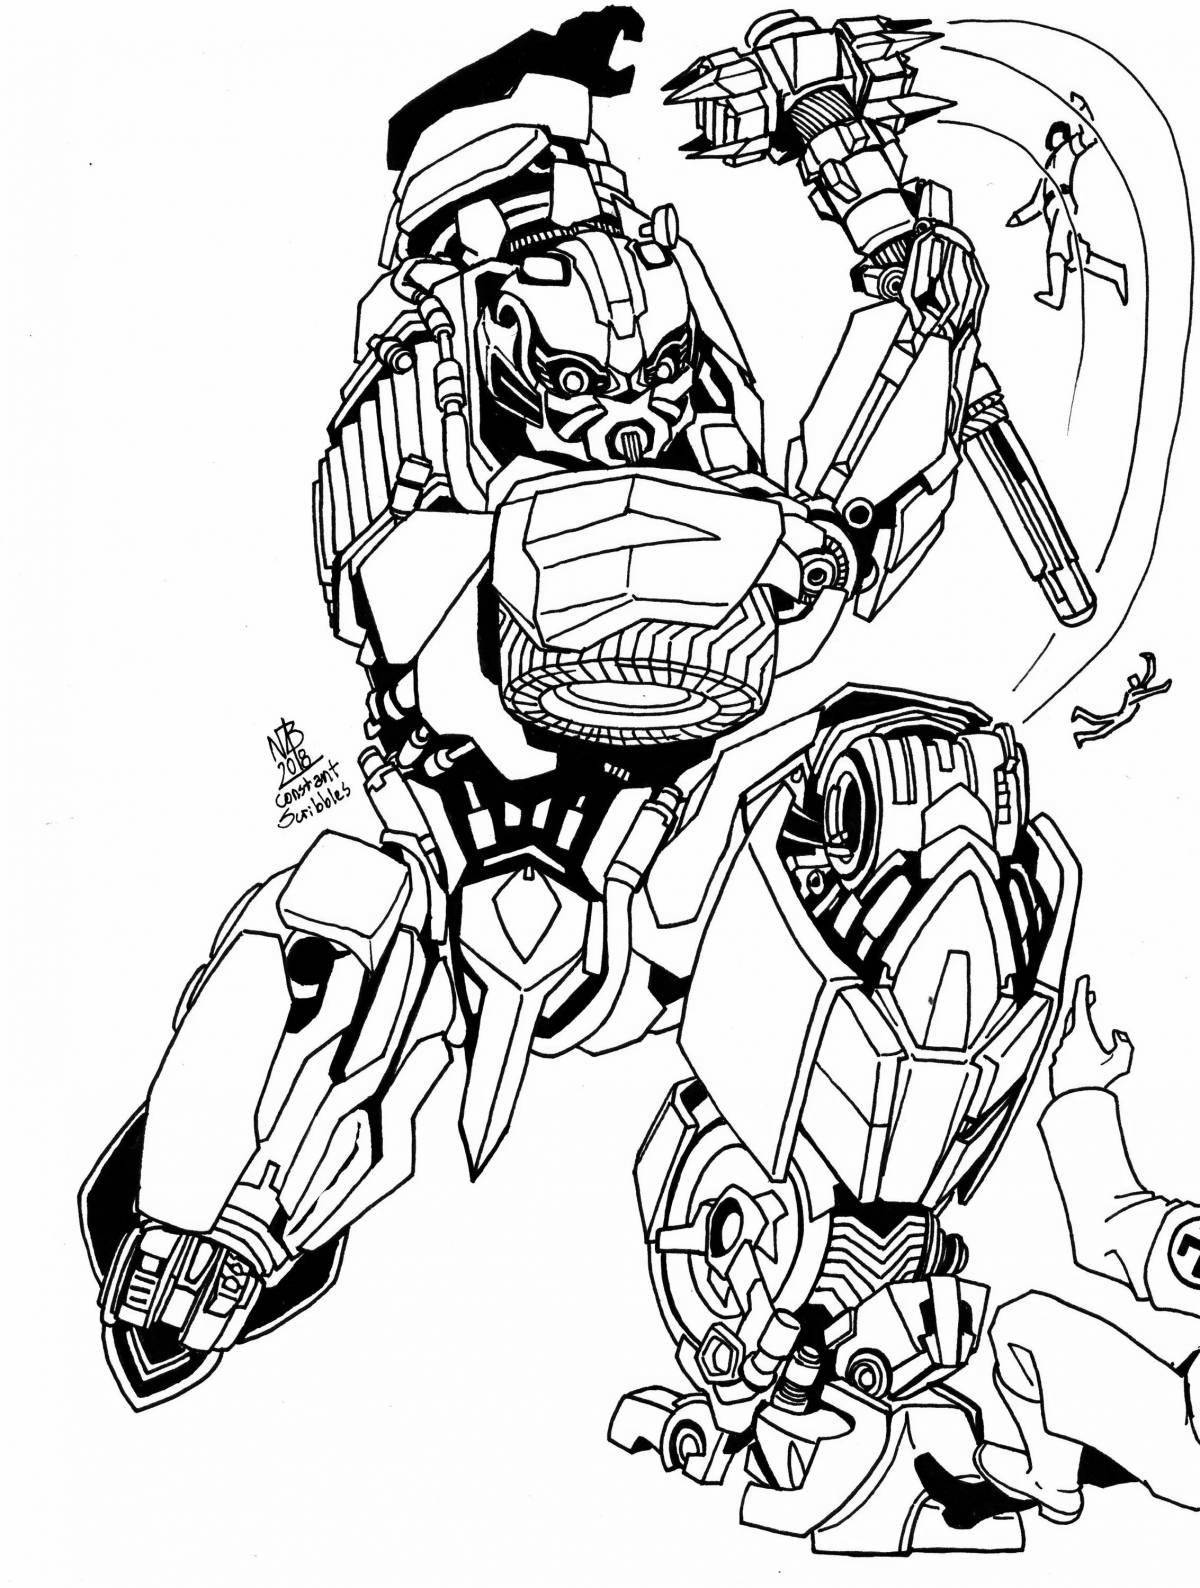 Intriguing bumblebee coloring page